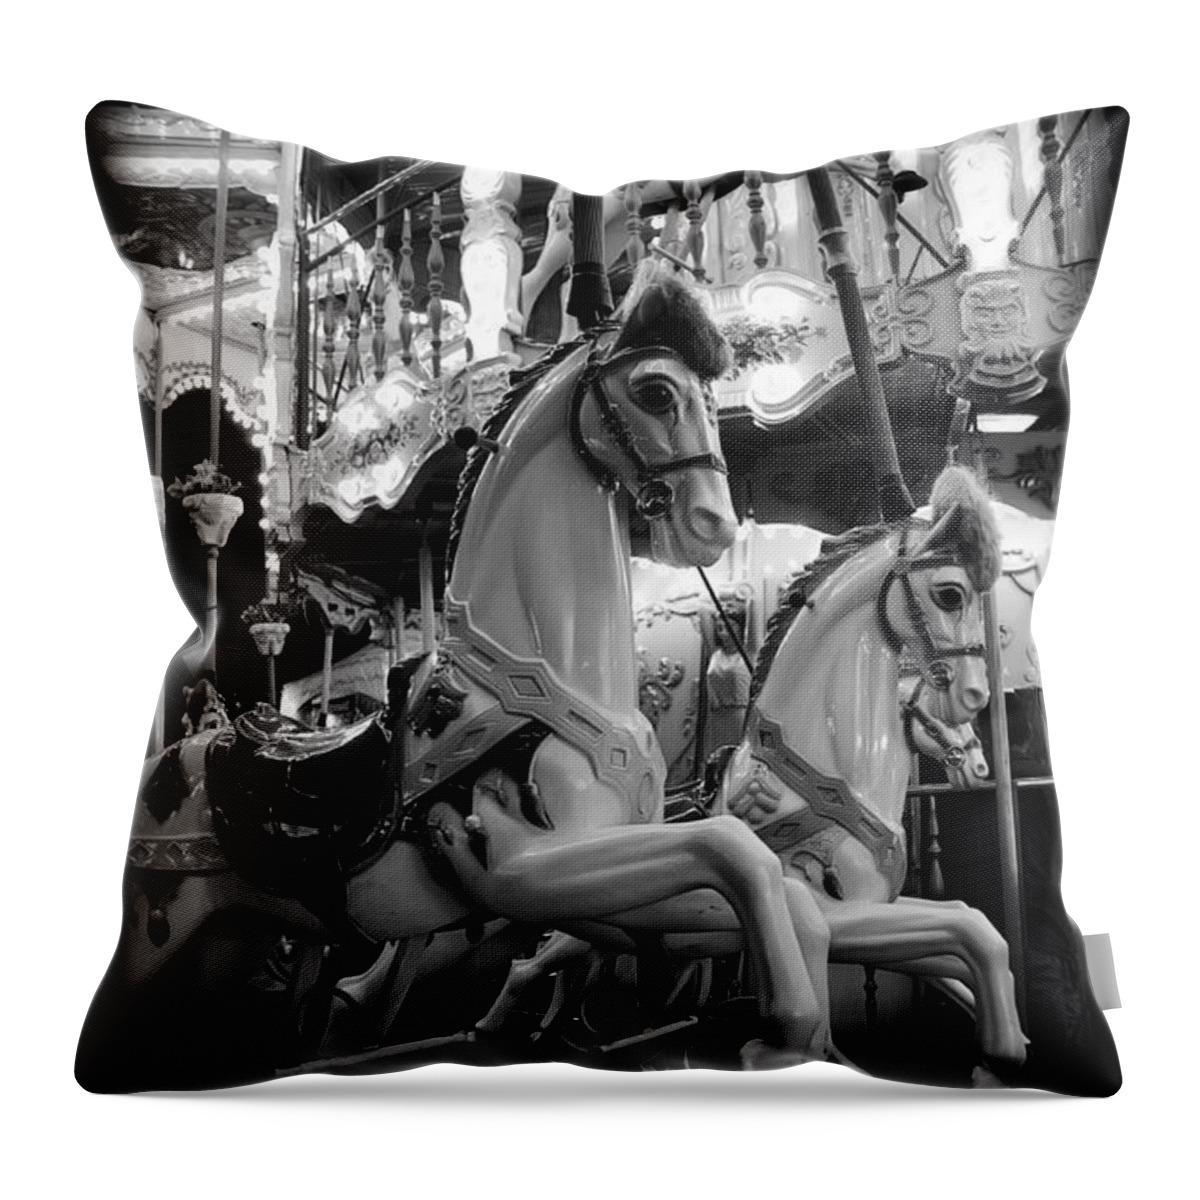 Carousel Throw Pillow featuring the photograph Carousel Horses No.2 by Tammy Wetzel